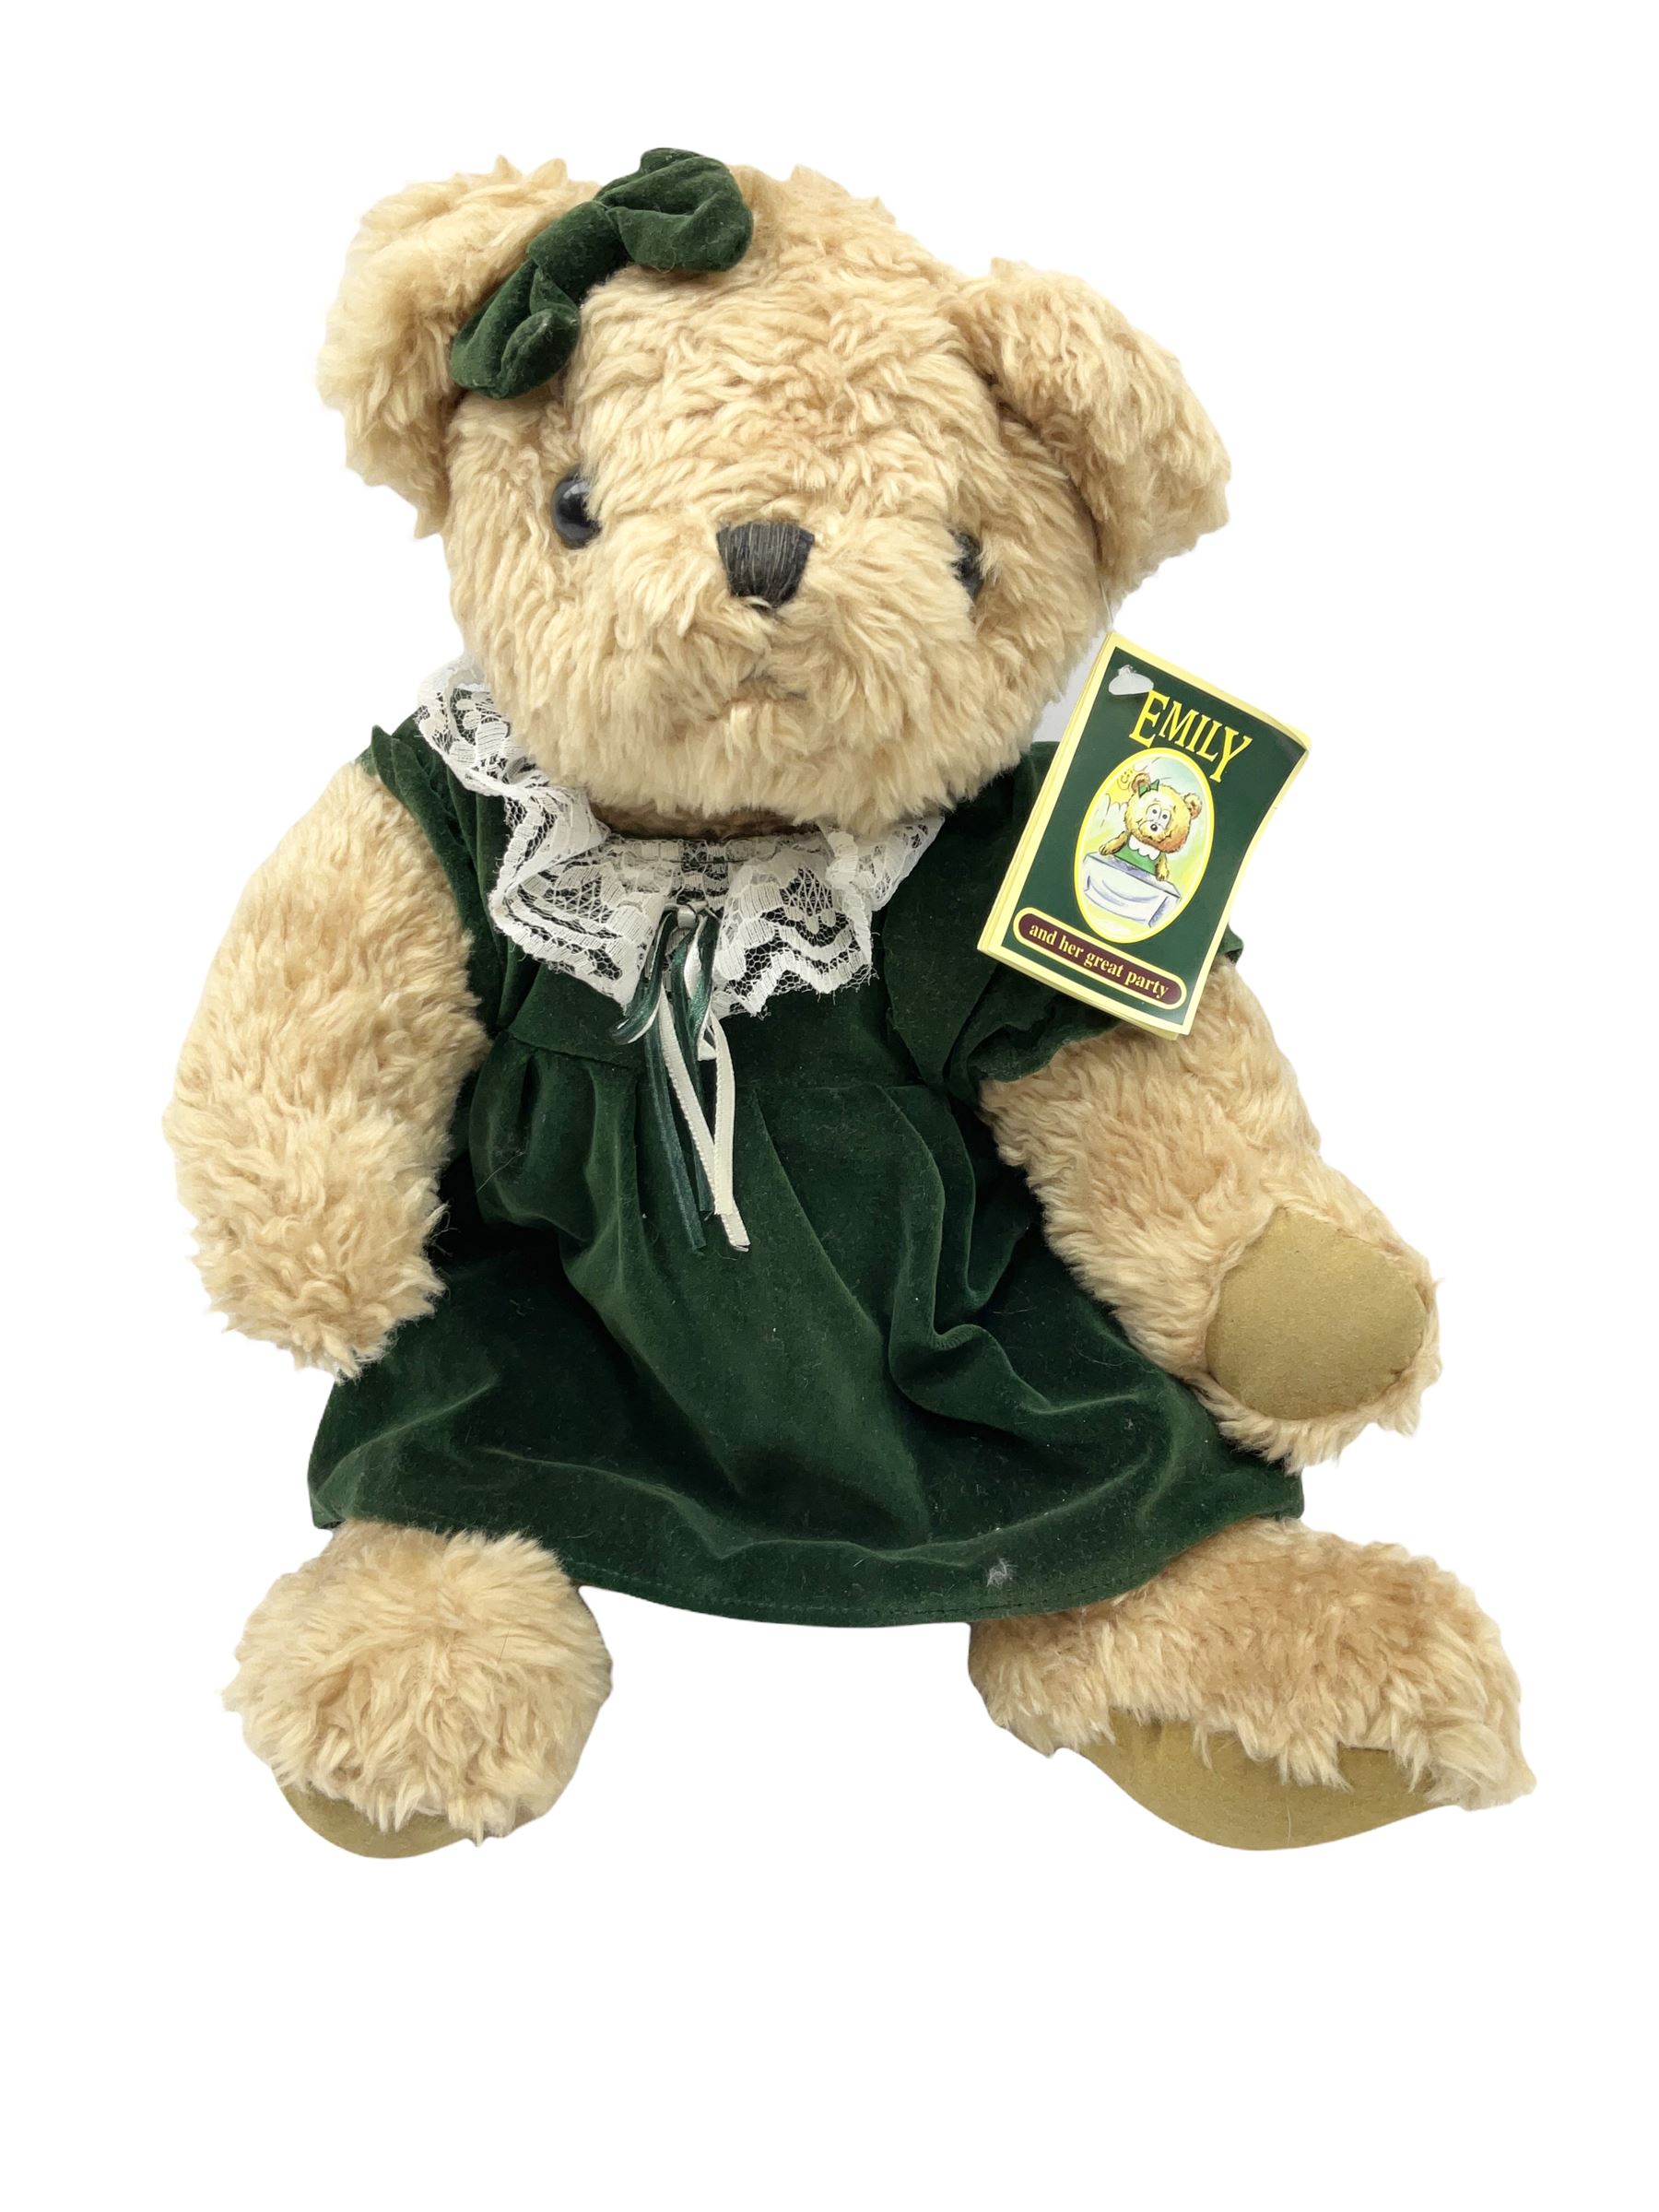 Five modern collector's teddy bears - Steiff 2001 bear No.660177 with tags; Hermann limited edition - Image 5 of 8